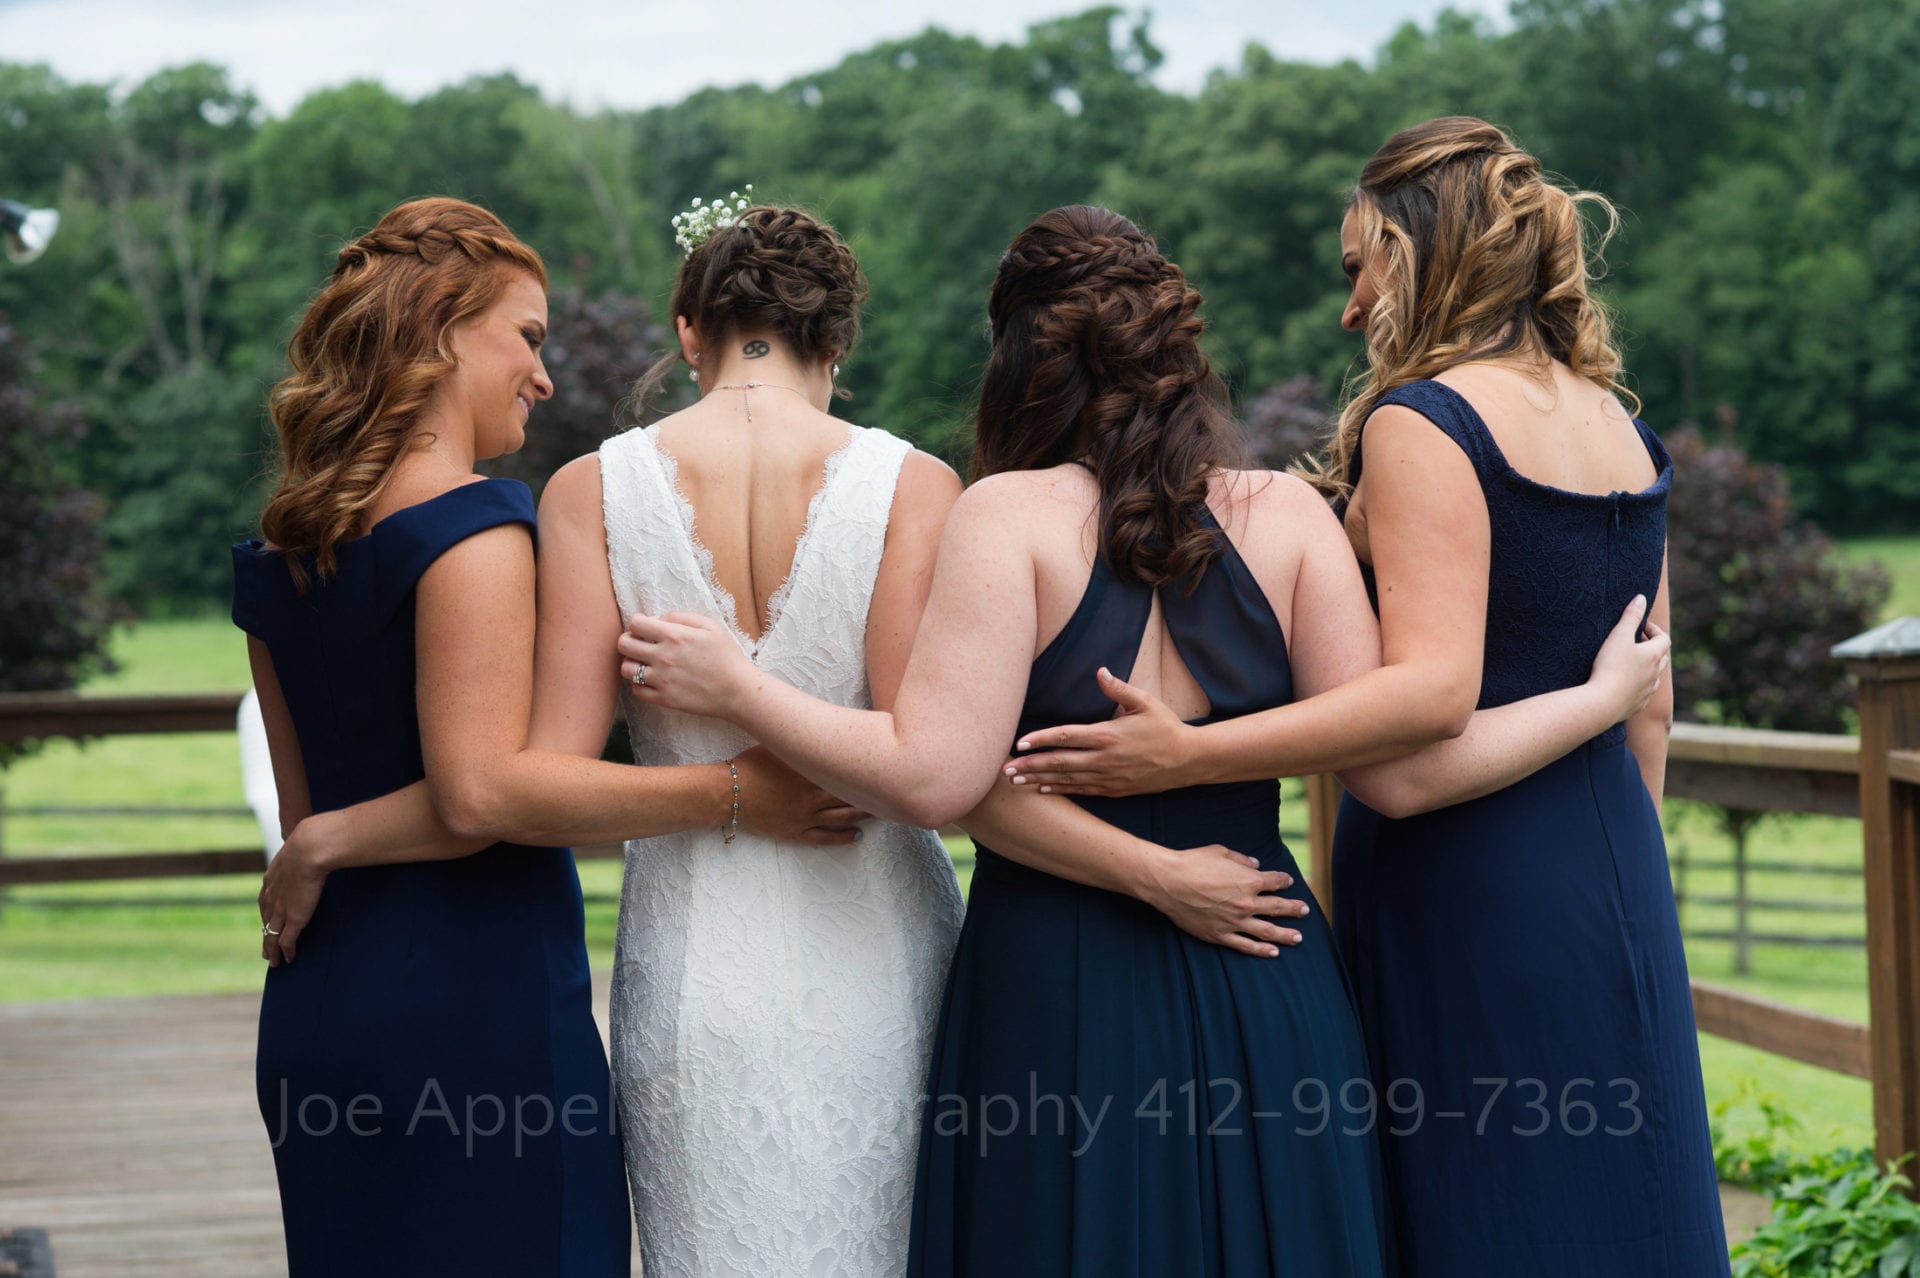 A bride in white and her bridesmaids hold their arms around each other as they stand outside during an Armstrong Farms Wedding. The photo is shot from behind.